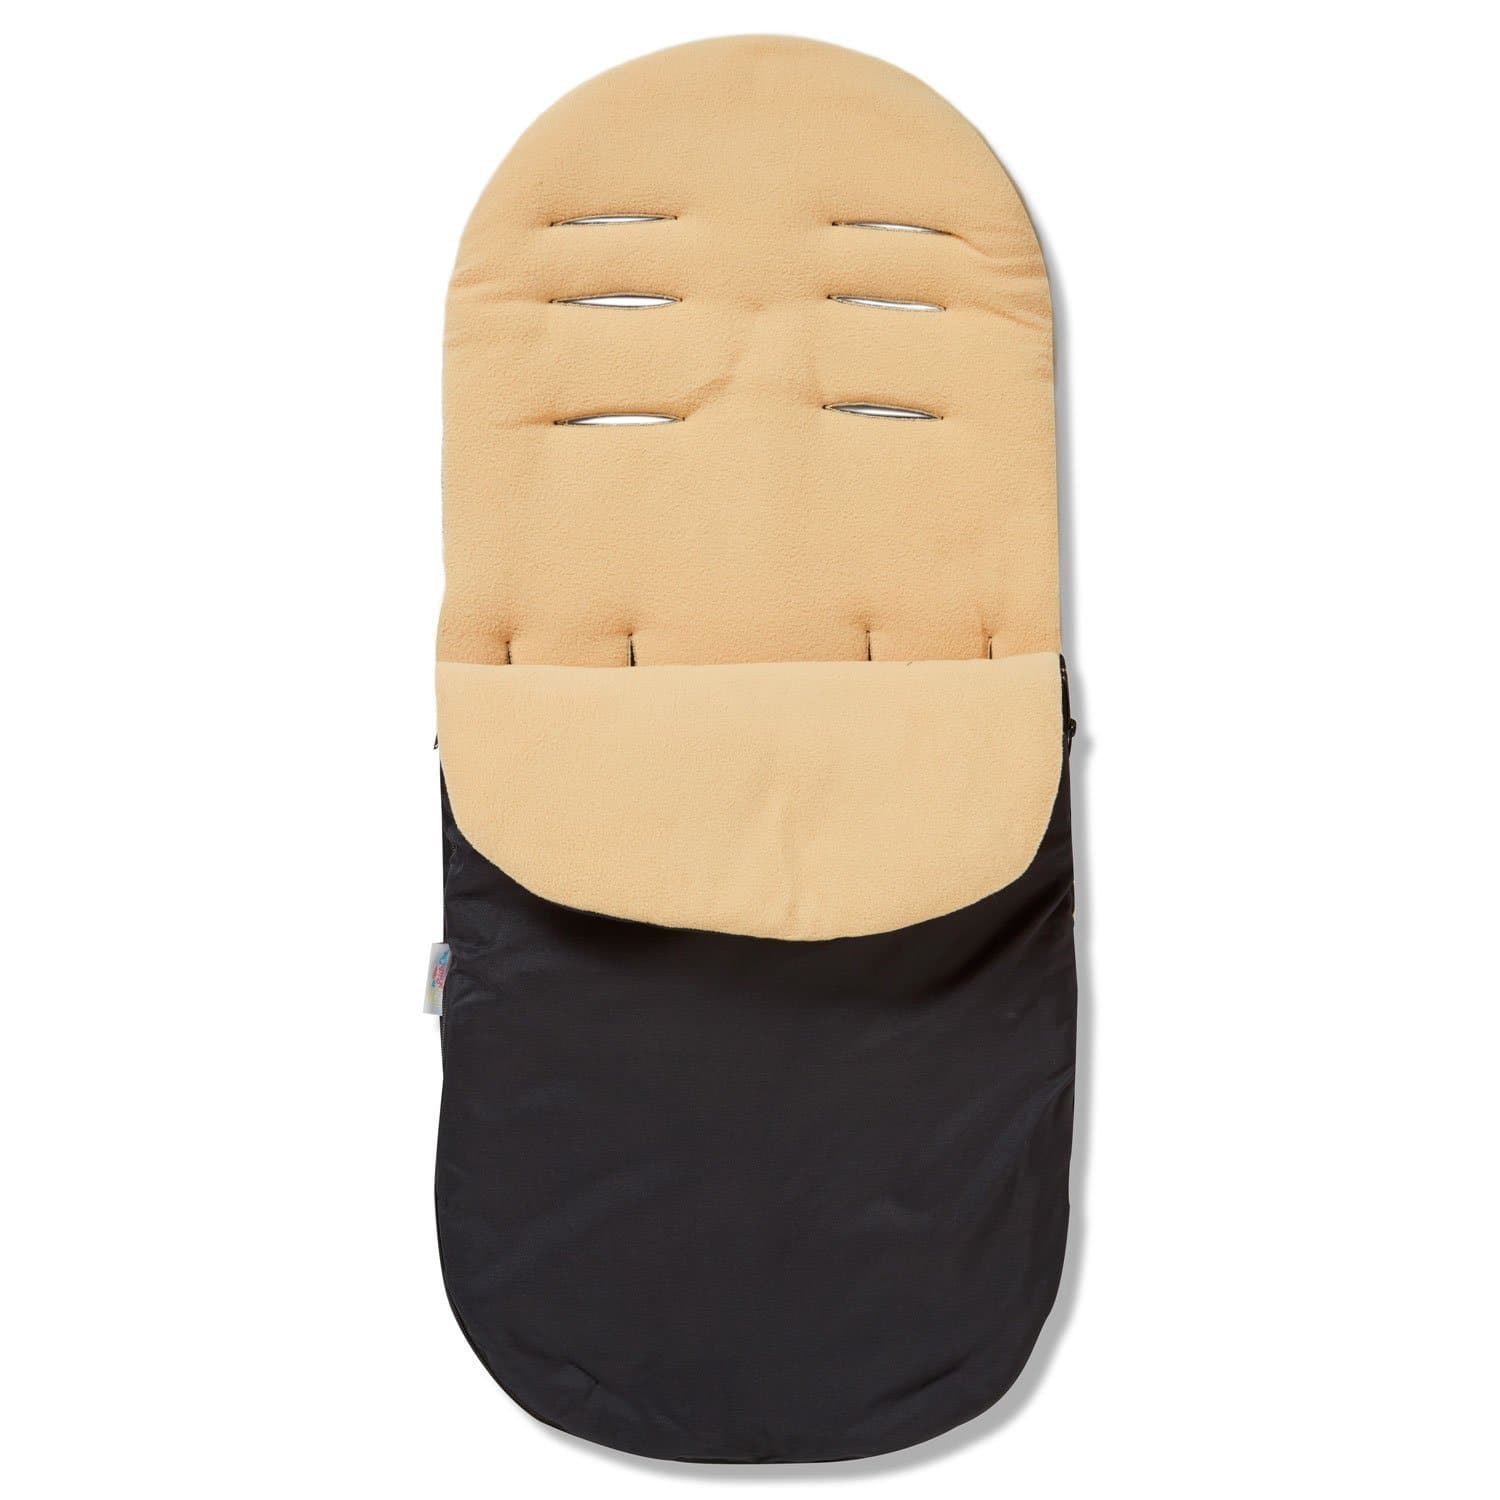 Footmuff / Cosy Toes Compatible with Unilove - Sand / Fits All Models | For Your Little One